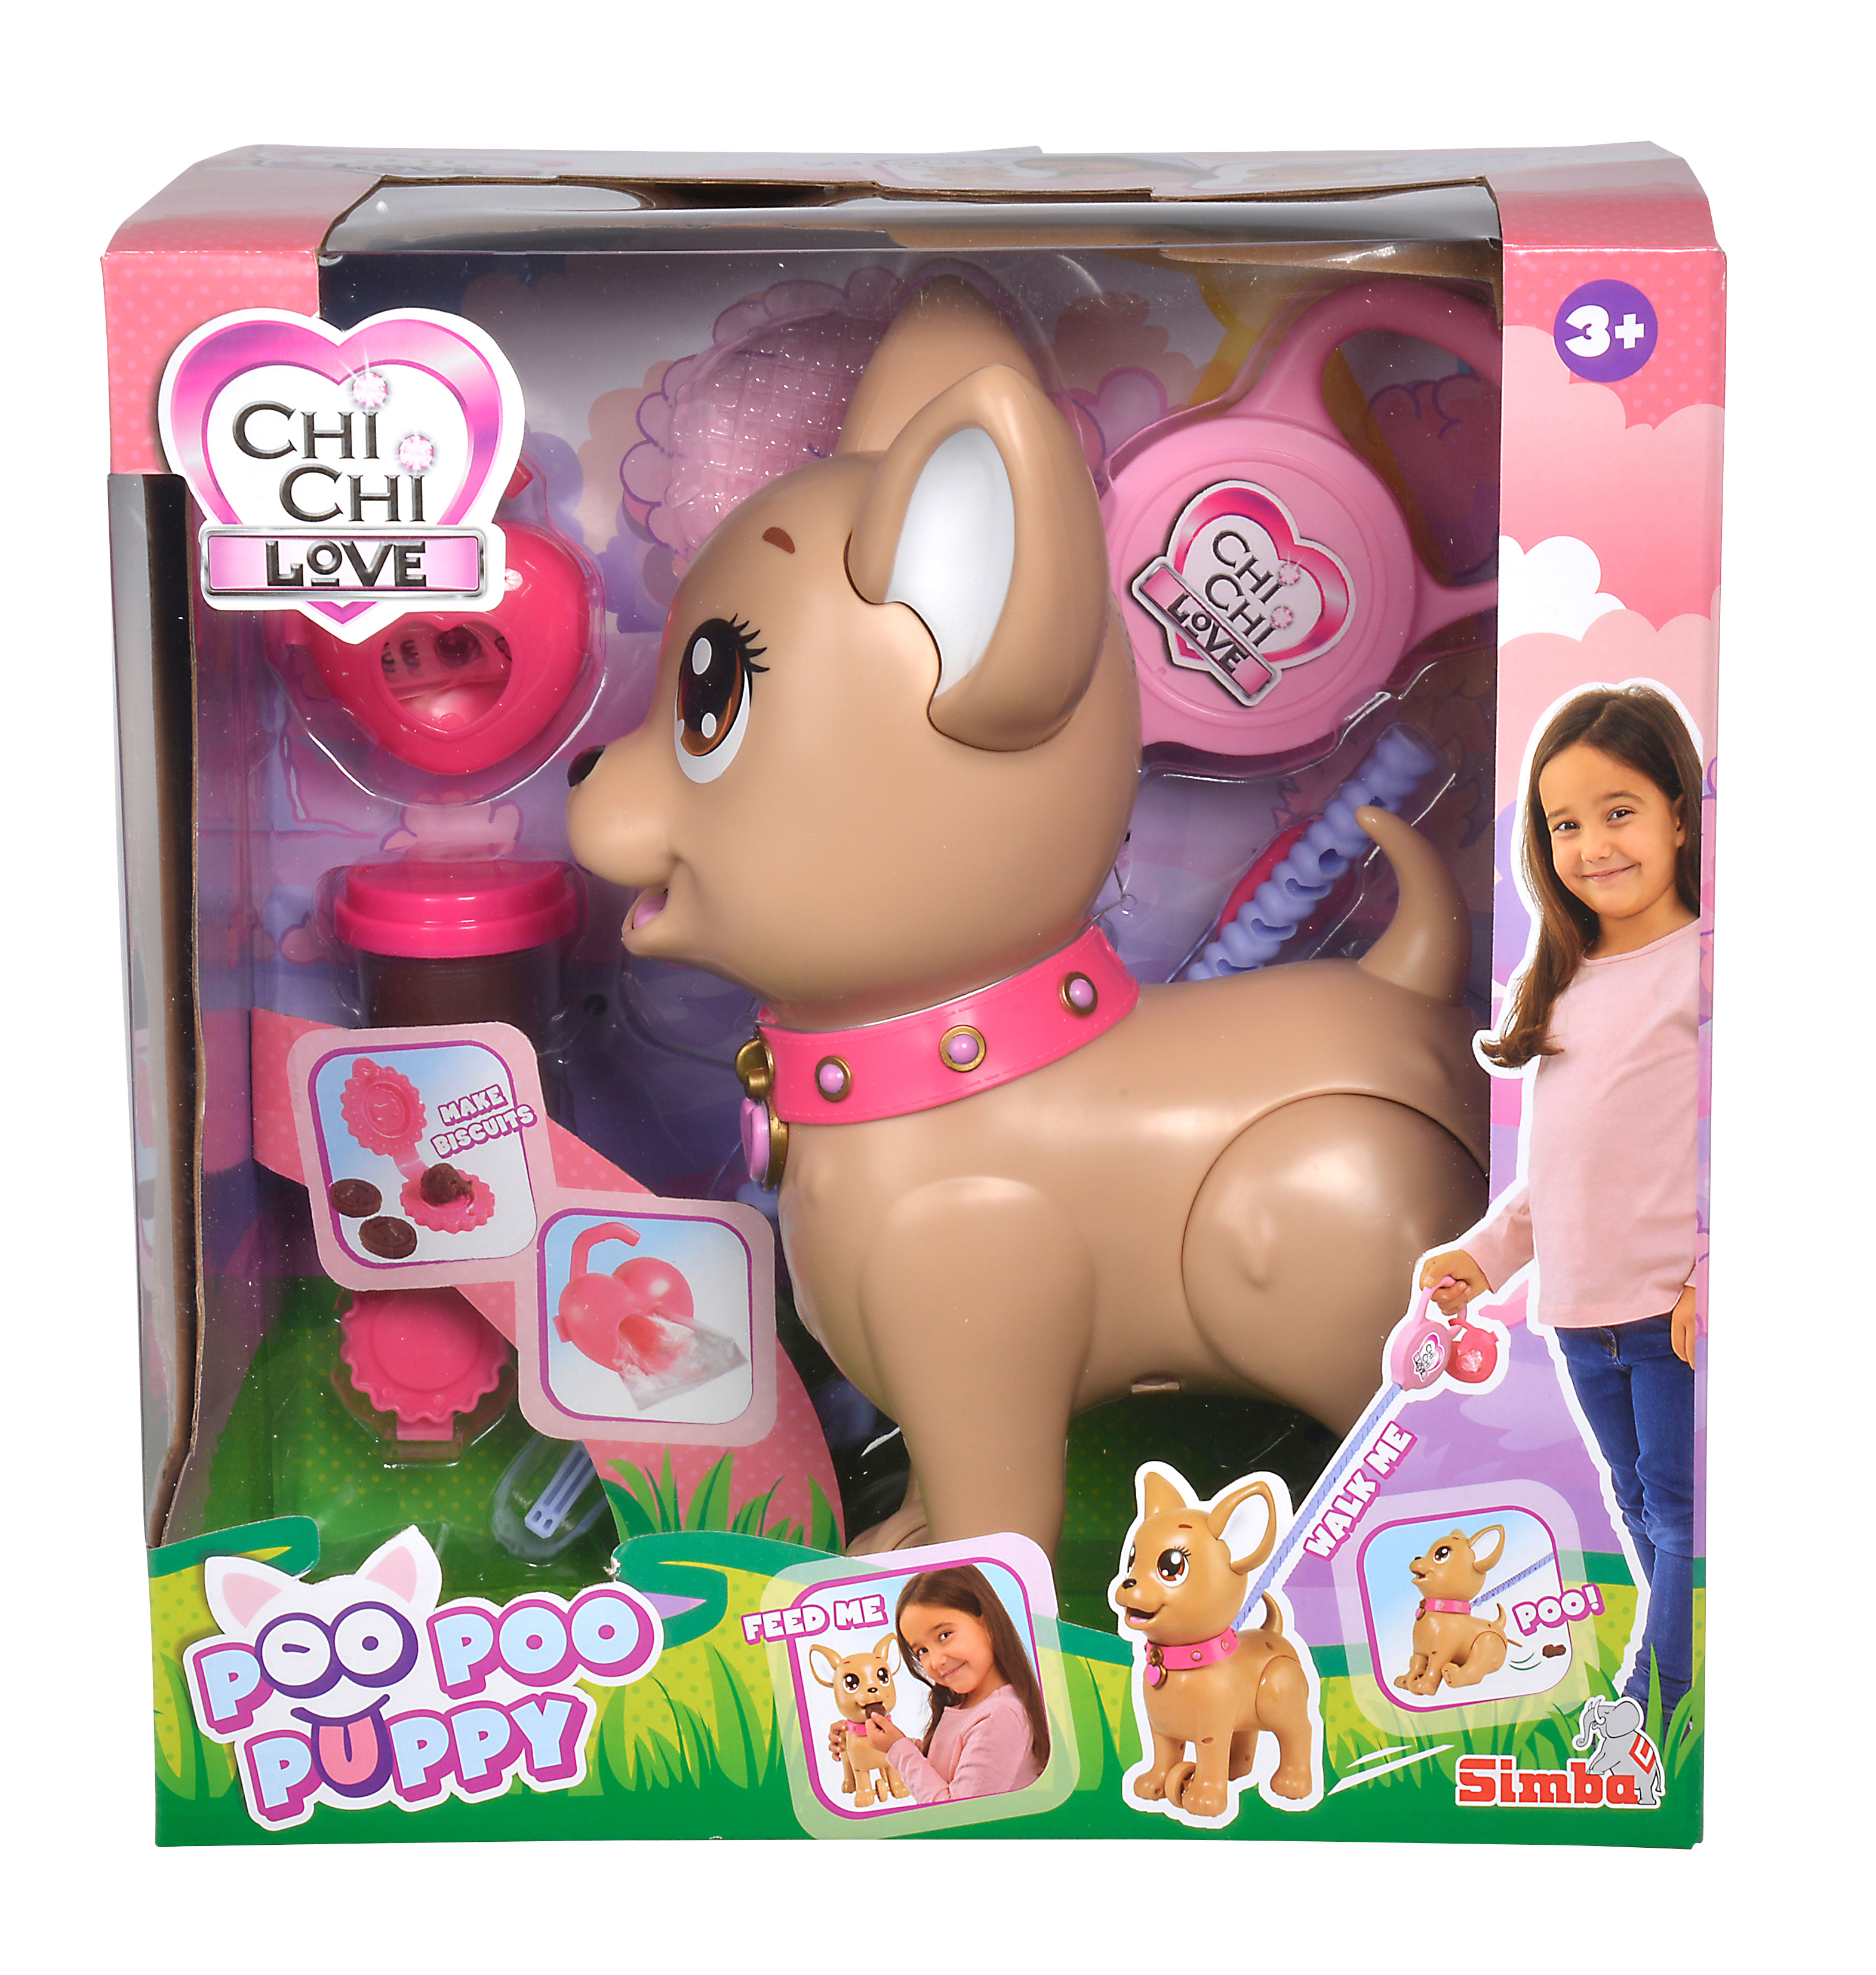 SIMBA TOYS Chi Chi Poo Mehrfarbig Poo Puppy Funktionsspielzeug Love